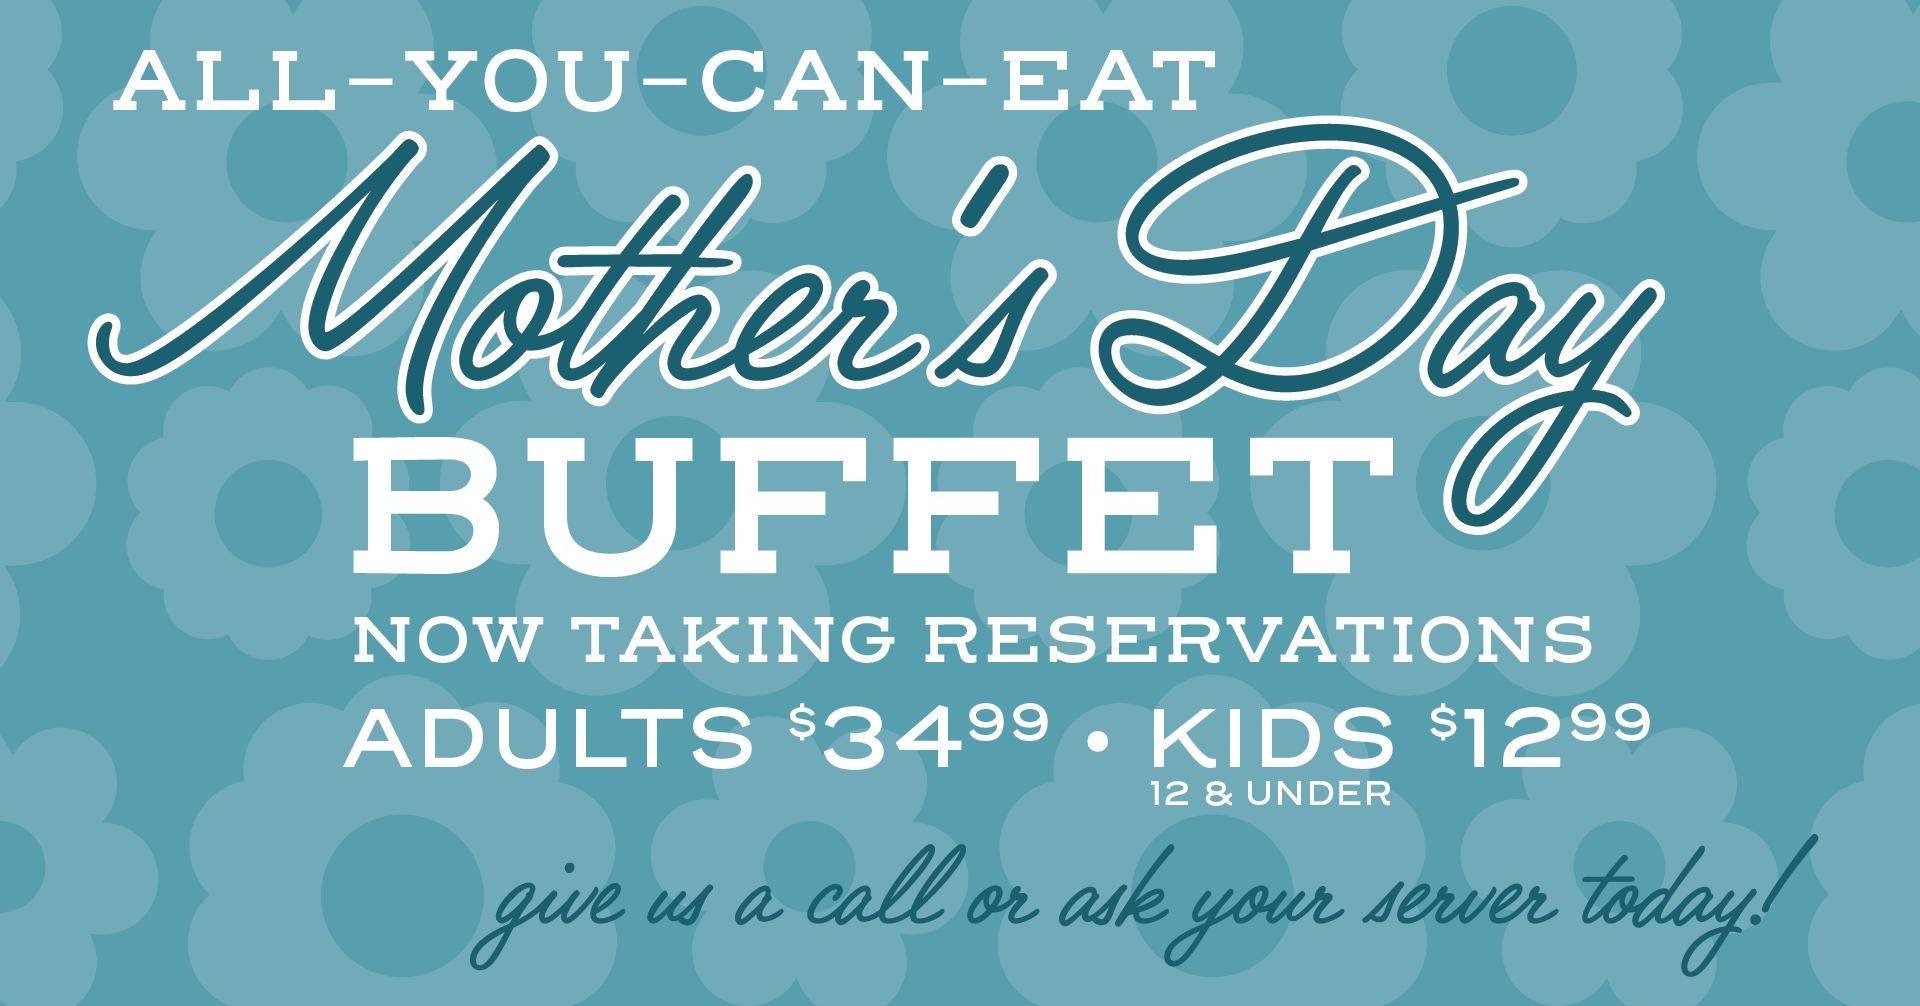 Mother's Day is coming up on Sunday, May 12! There's still time to make your reservation for our all-you-can-eat buffet featuring a meat carving station, breakfast classics, salads, desserts, kid's buffet &amp; more 🌷 

Adults are $34.99, kids eat f